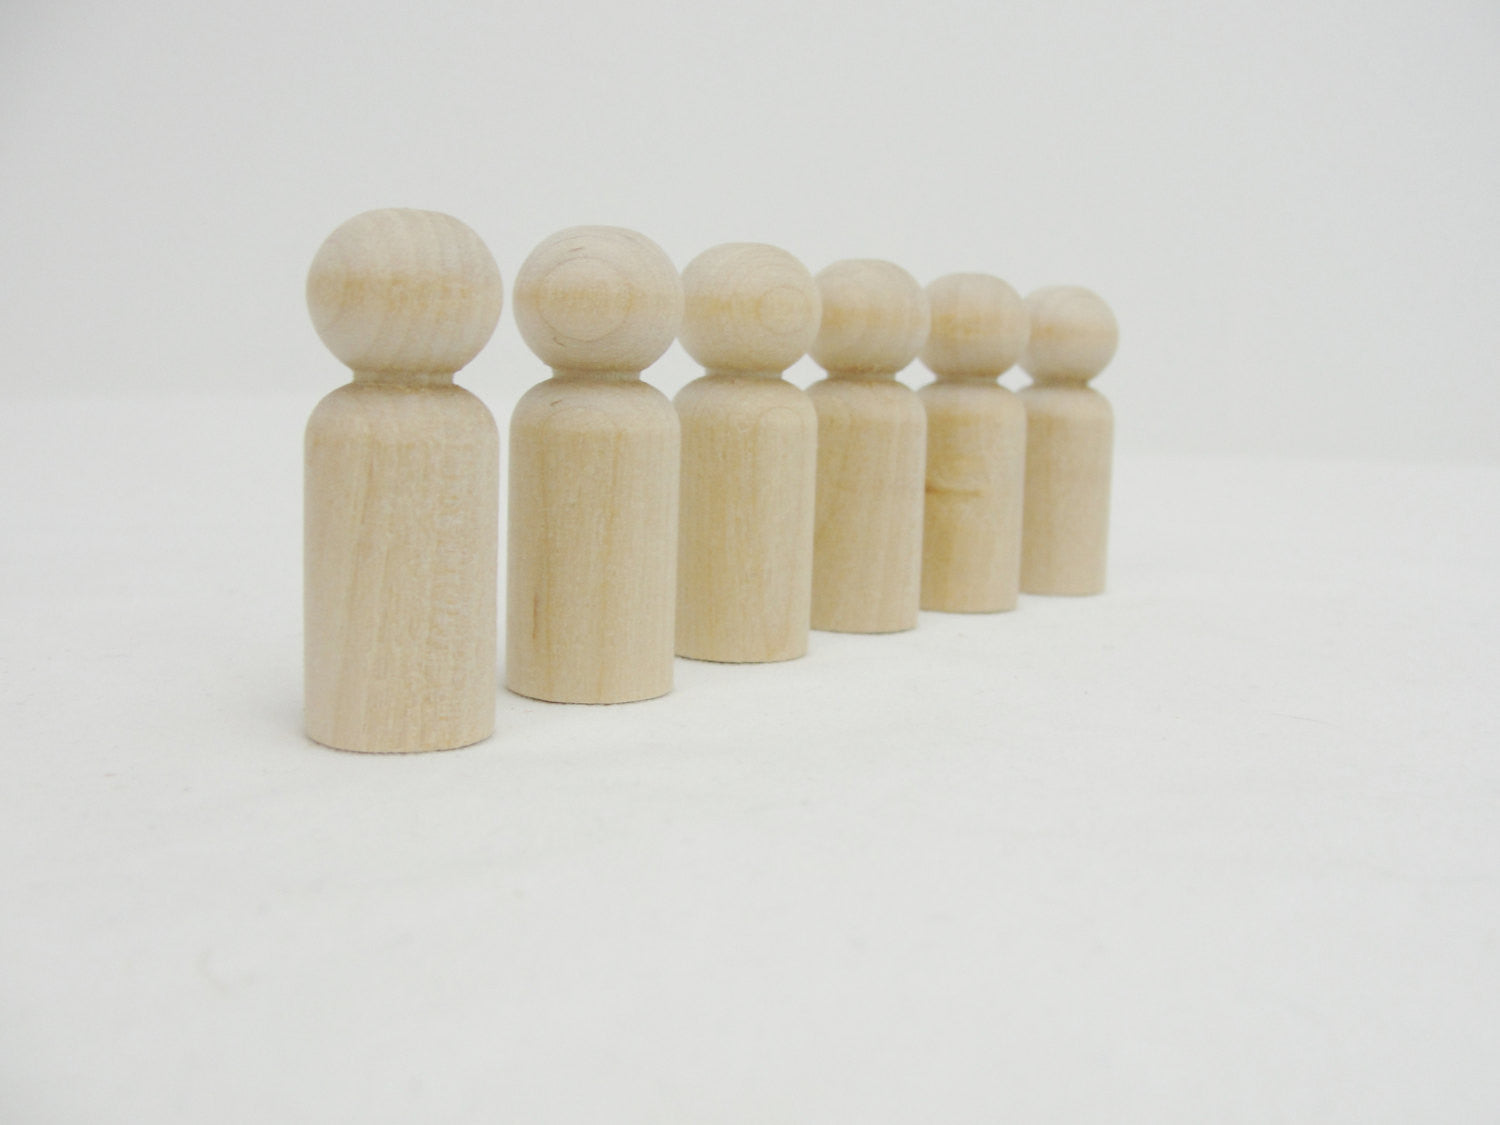 Wooden peg people boy set of 6 - Wood parts - Craft Supply House